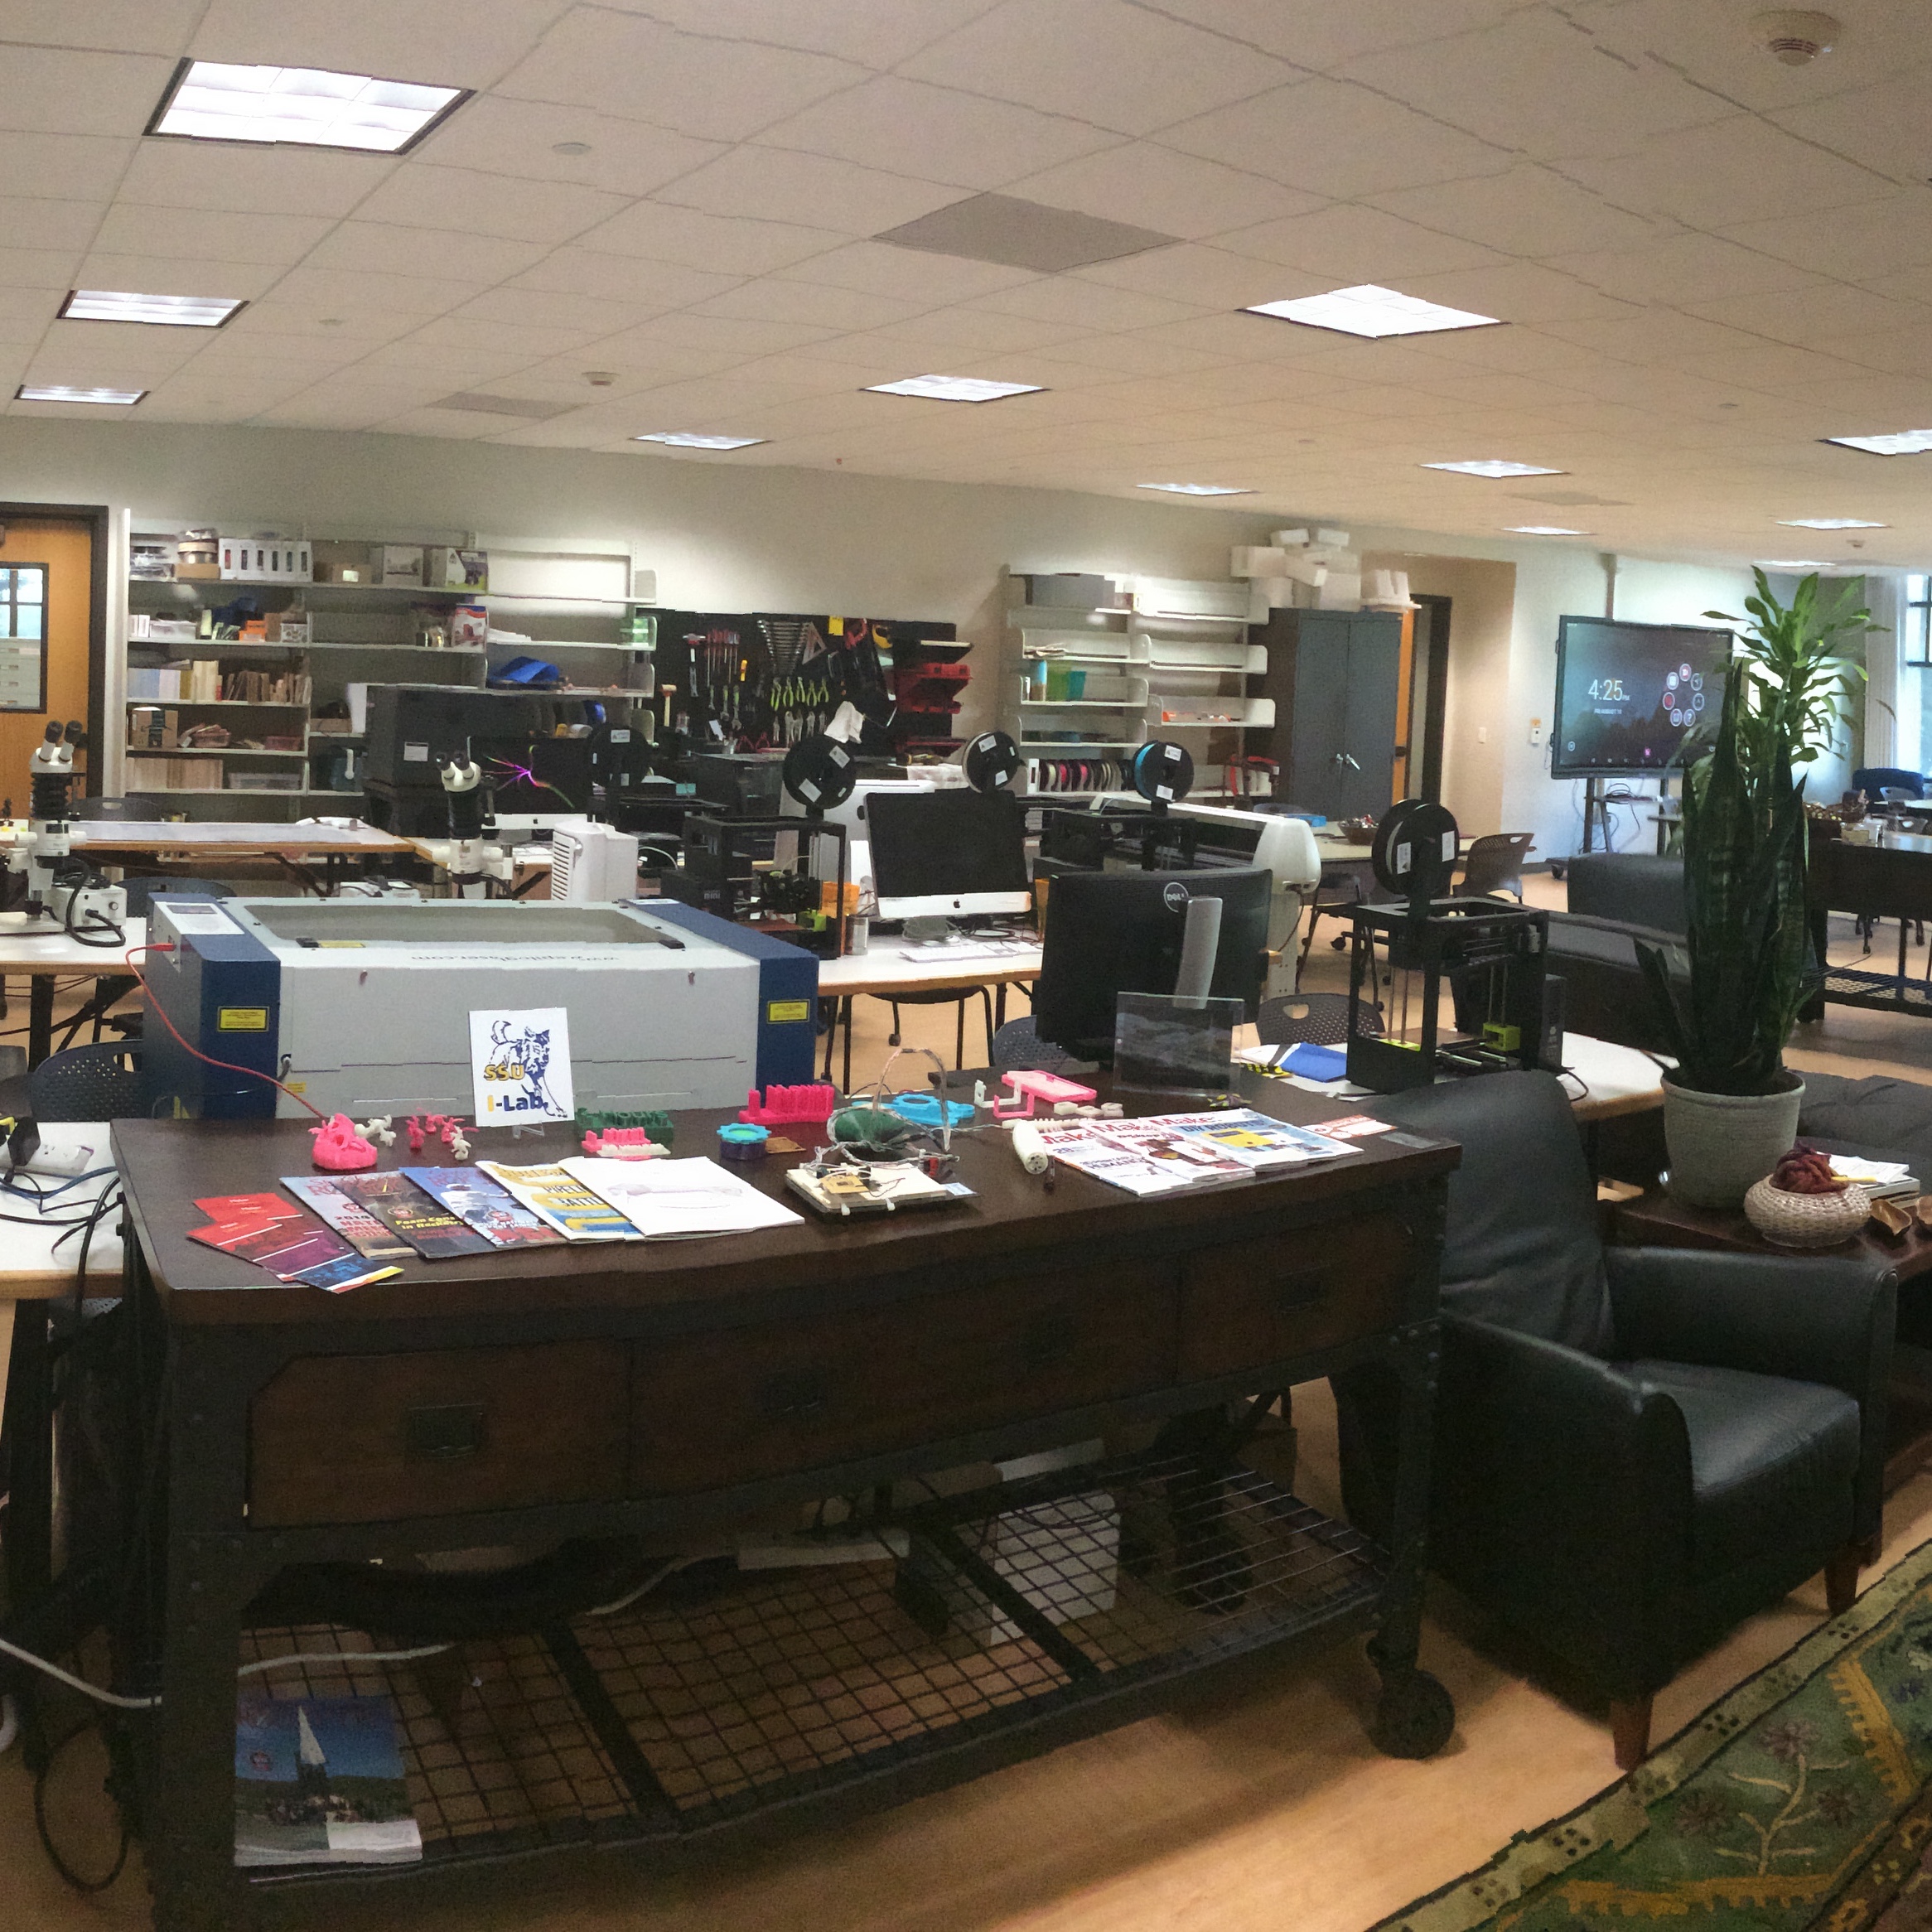 A fraction of a panoramic shot of the makerspace